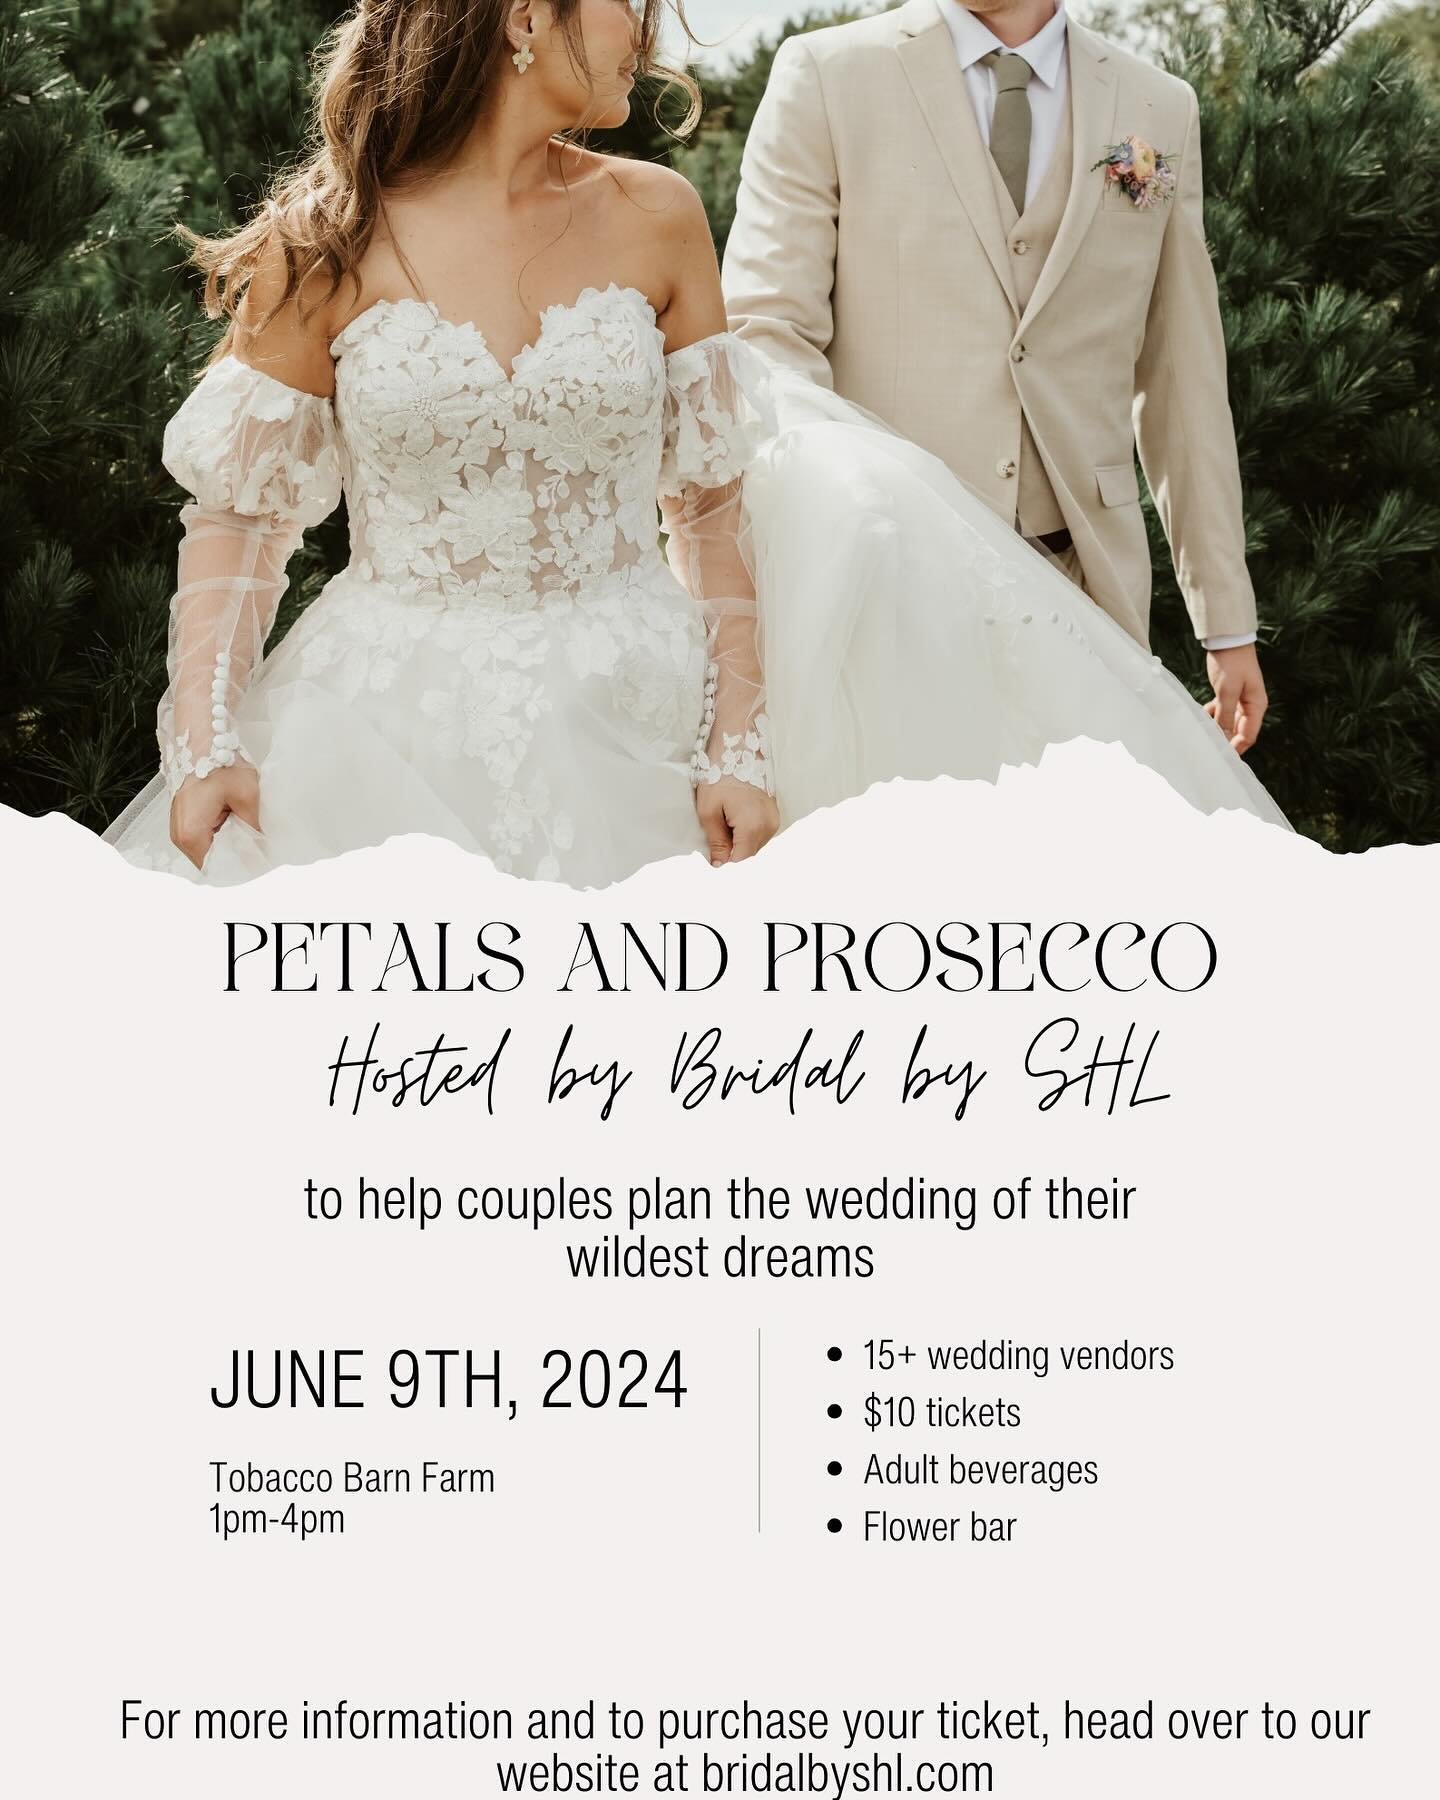 Trust me babes, you won't want to miss this event! Come enjoy an afternoon of cocktails, making your own flower bouquet to take home, and meeting with over 15+ vendors in the KC wedding industry that are ready to make your wedding day dreams come tru